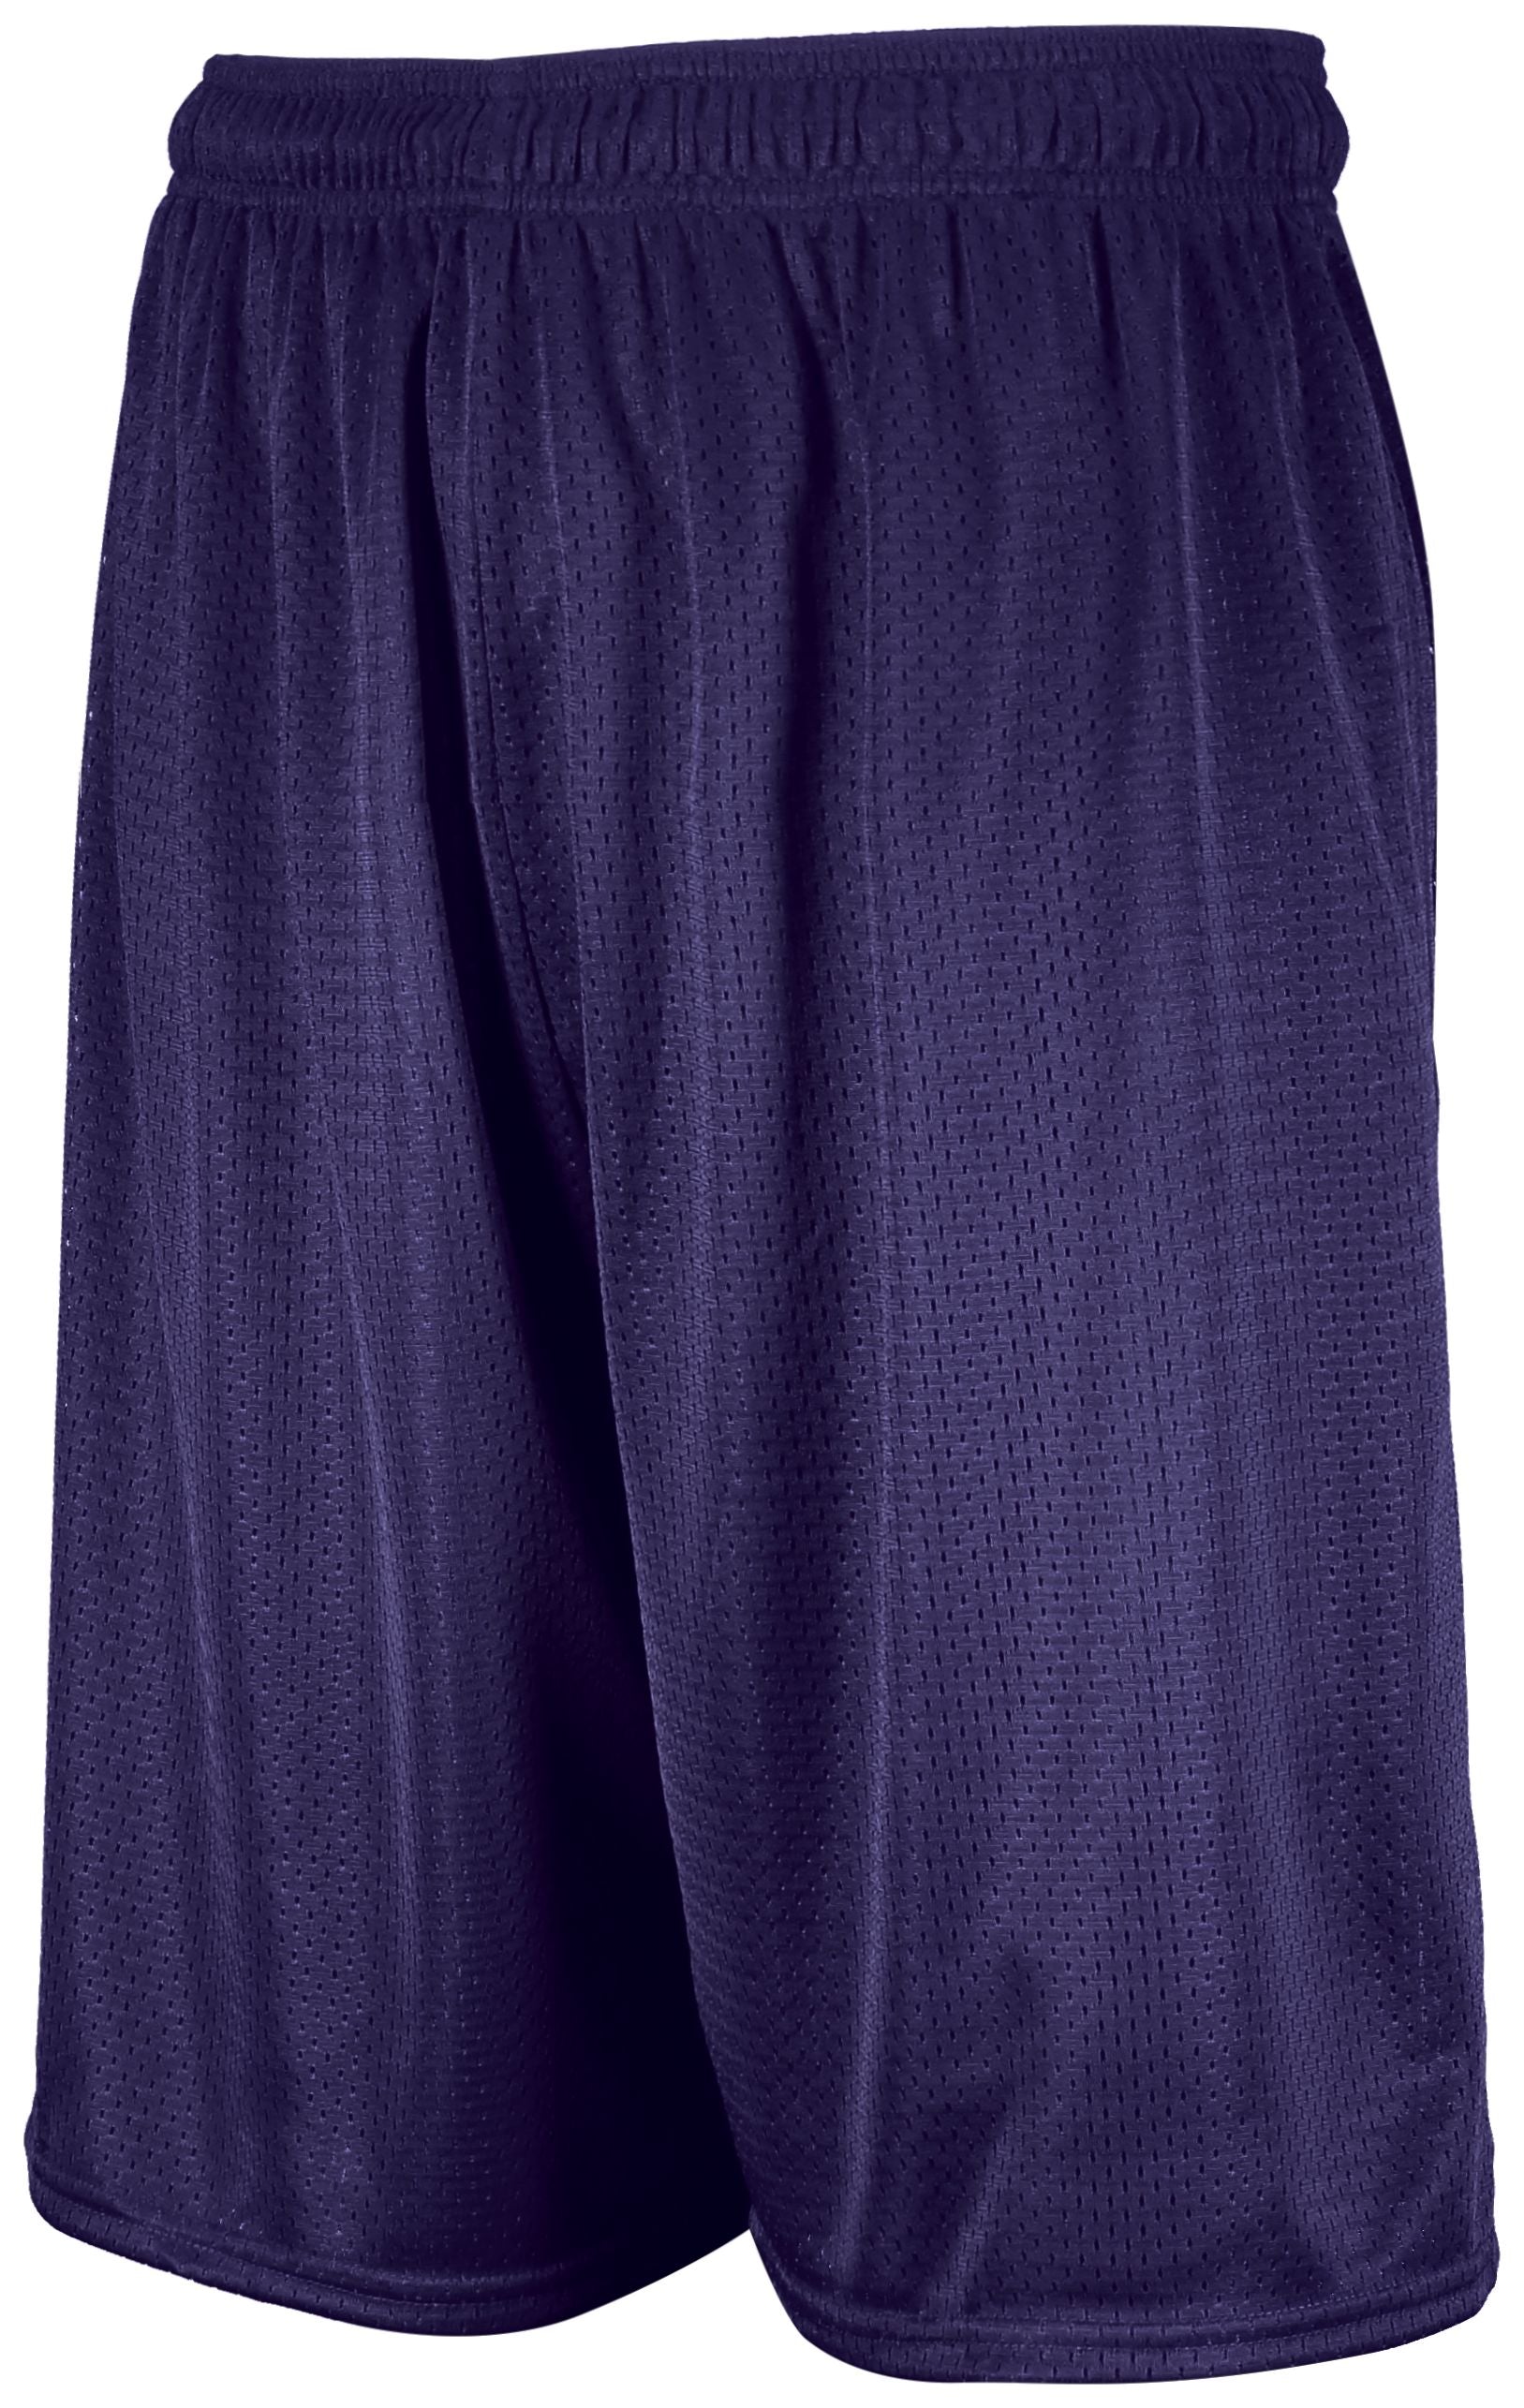 Russell Athletic Dri-Power Mesh Shorts in Purple  -Part of the Adult, Adult-Shorts, Russell-Athletic-Products product lines at KanaleyCreations.com